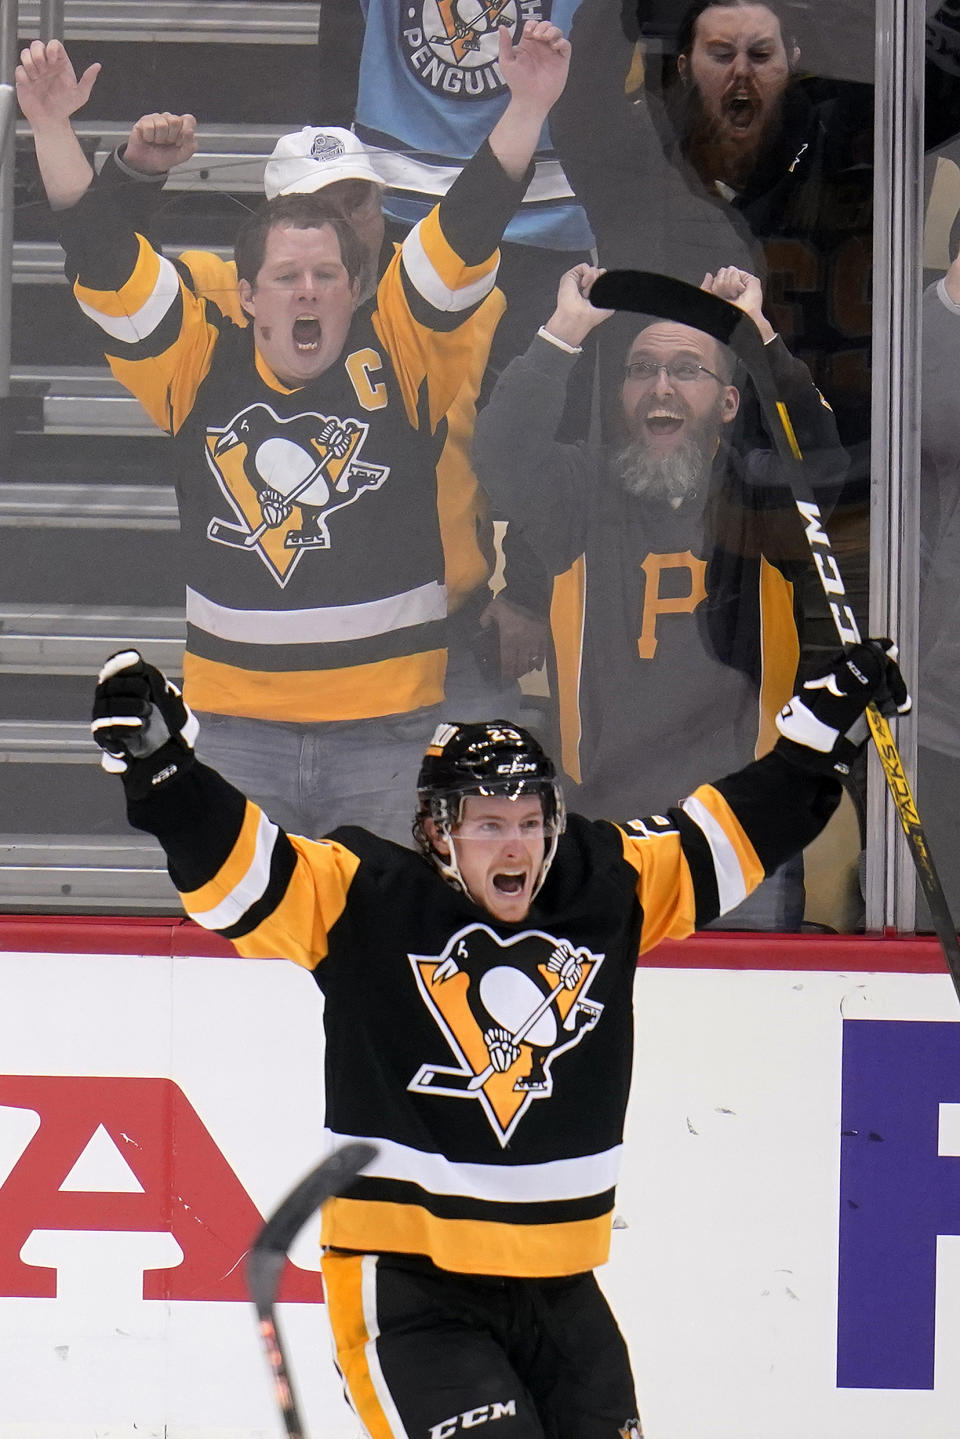 Pittsburgh Penguins' Brock McGinn celebrates his goal during the third period of an NHL hockey game against the St. Louis Blues in Pittsburgh, Wednesday, Jan. 5, 2022. The Penguins won 5-3. (AP Photo/Gene J. Puskar)